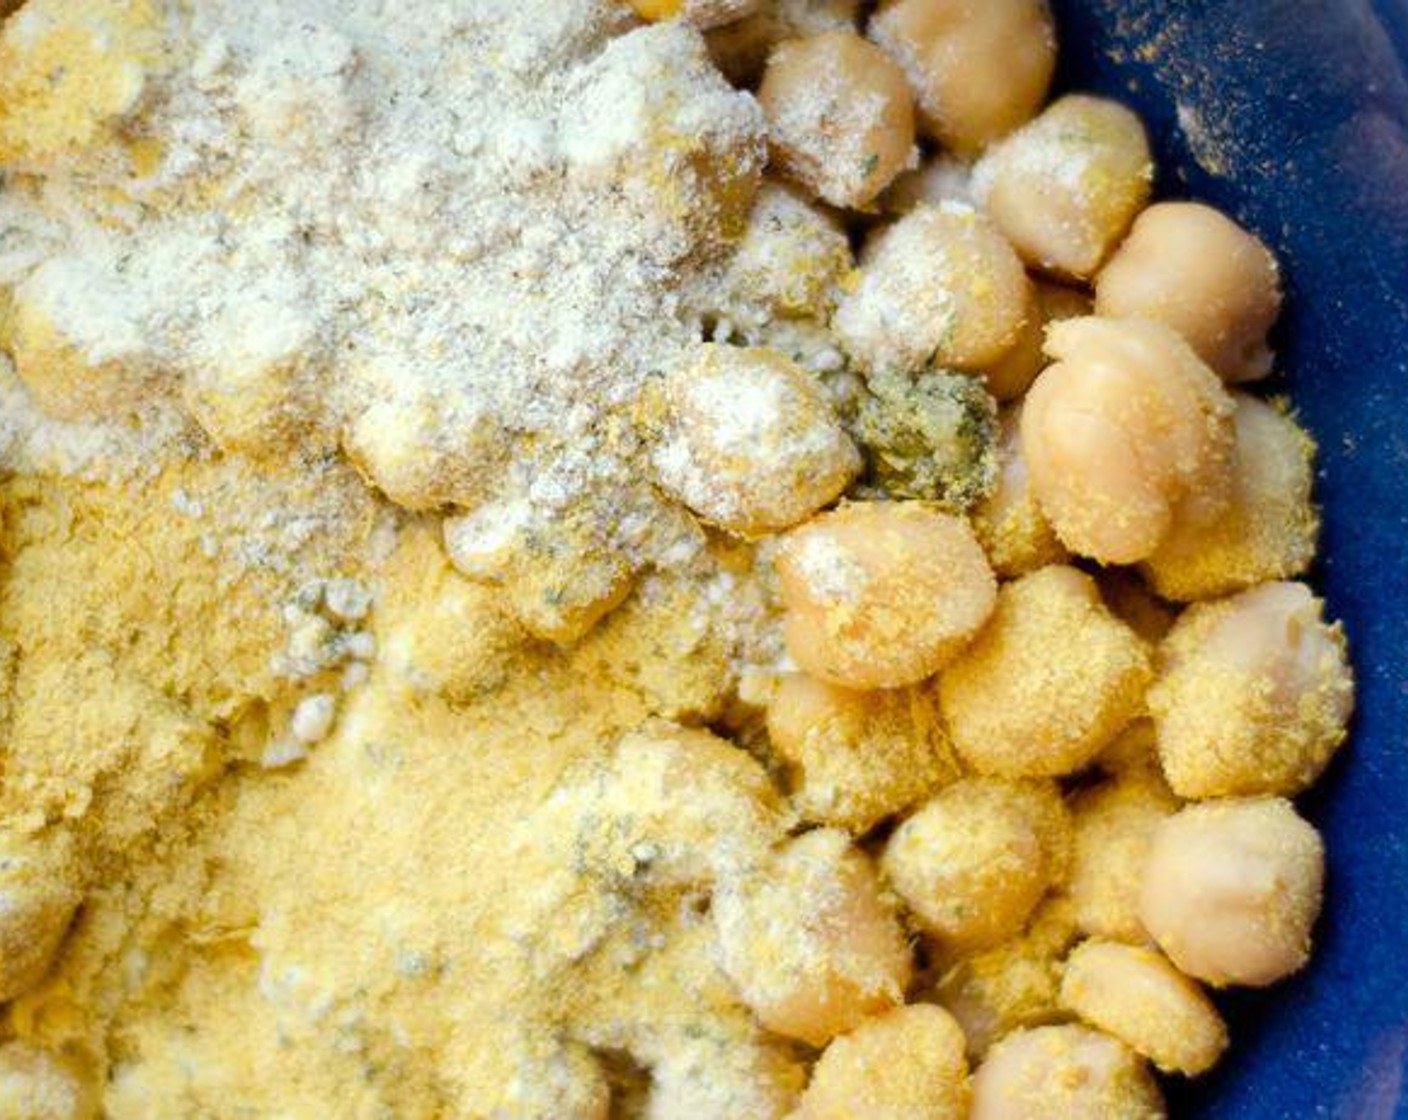 step 2 Gently toss chickpeas with Olive Oil (1 Tbsp), Ranch Seasoning Powder Mix (1 Tbsp), and Nutritional Yeast (1/2 Tbsp).